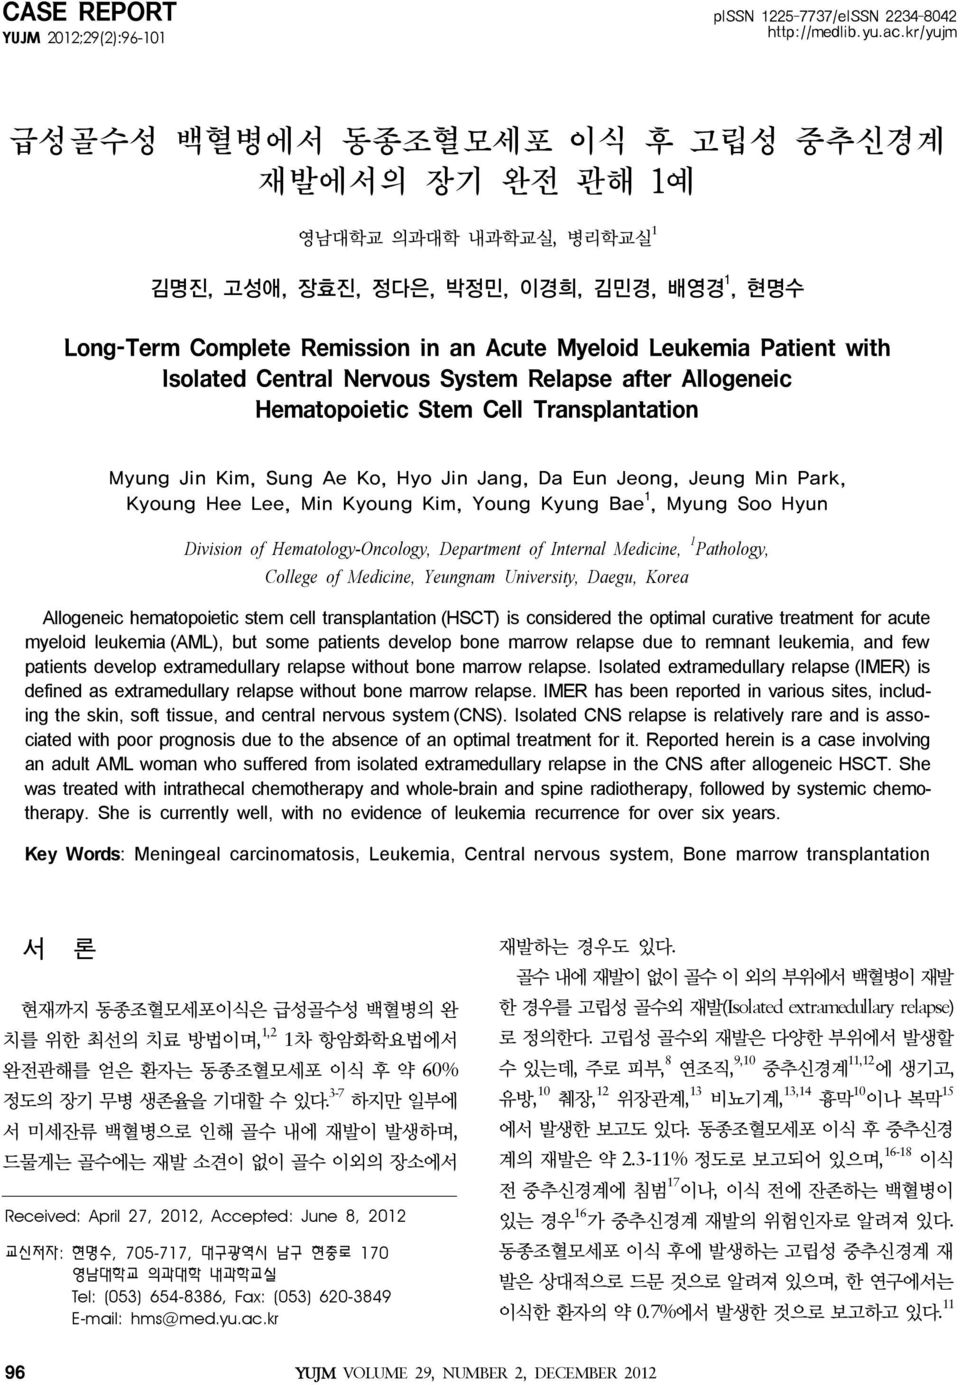 with Isolated Central Nervous System Relapse after Allogeneic Hematopoietic Stem Cell Transplantation Myung Jin Kim, Sung Ae Ko, Hyo Jin Jang, Da Eun Jeong, Jeung Min Park, Kyoung Hee Lee, Min Kyoung